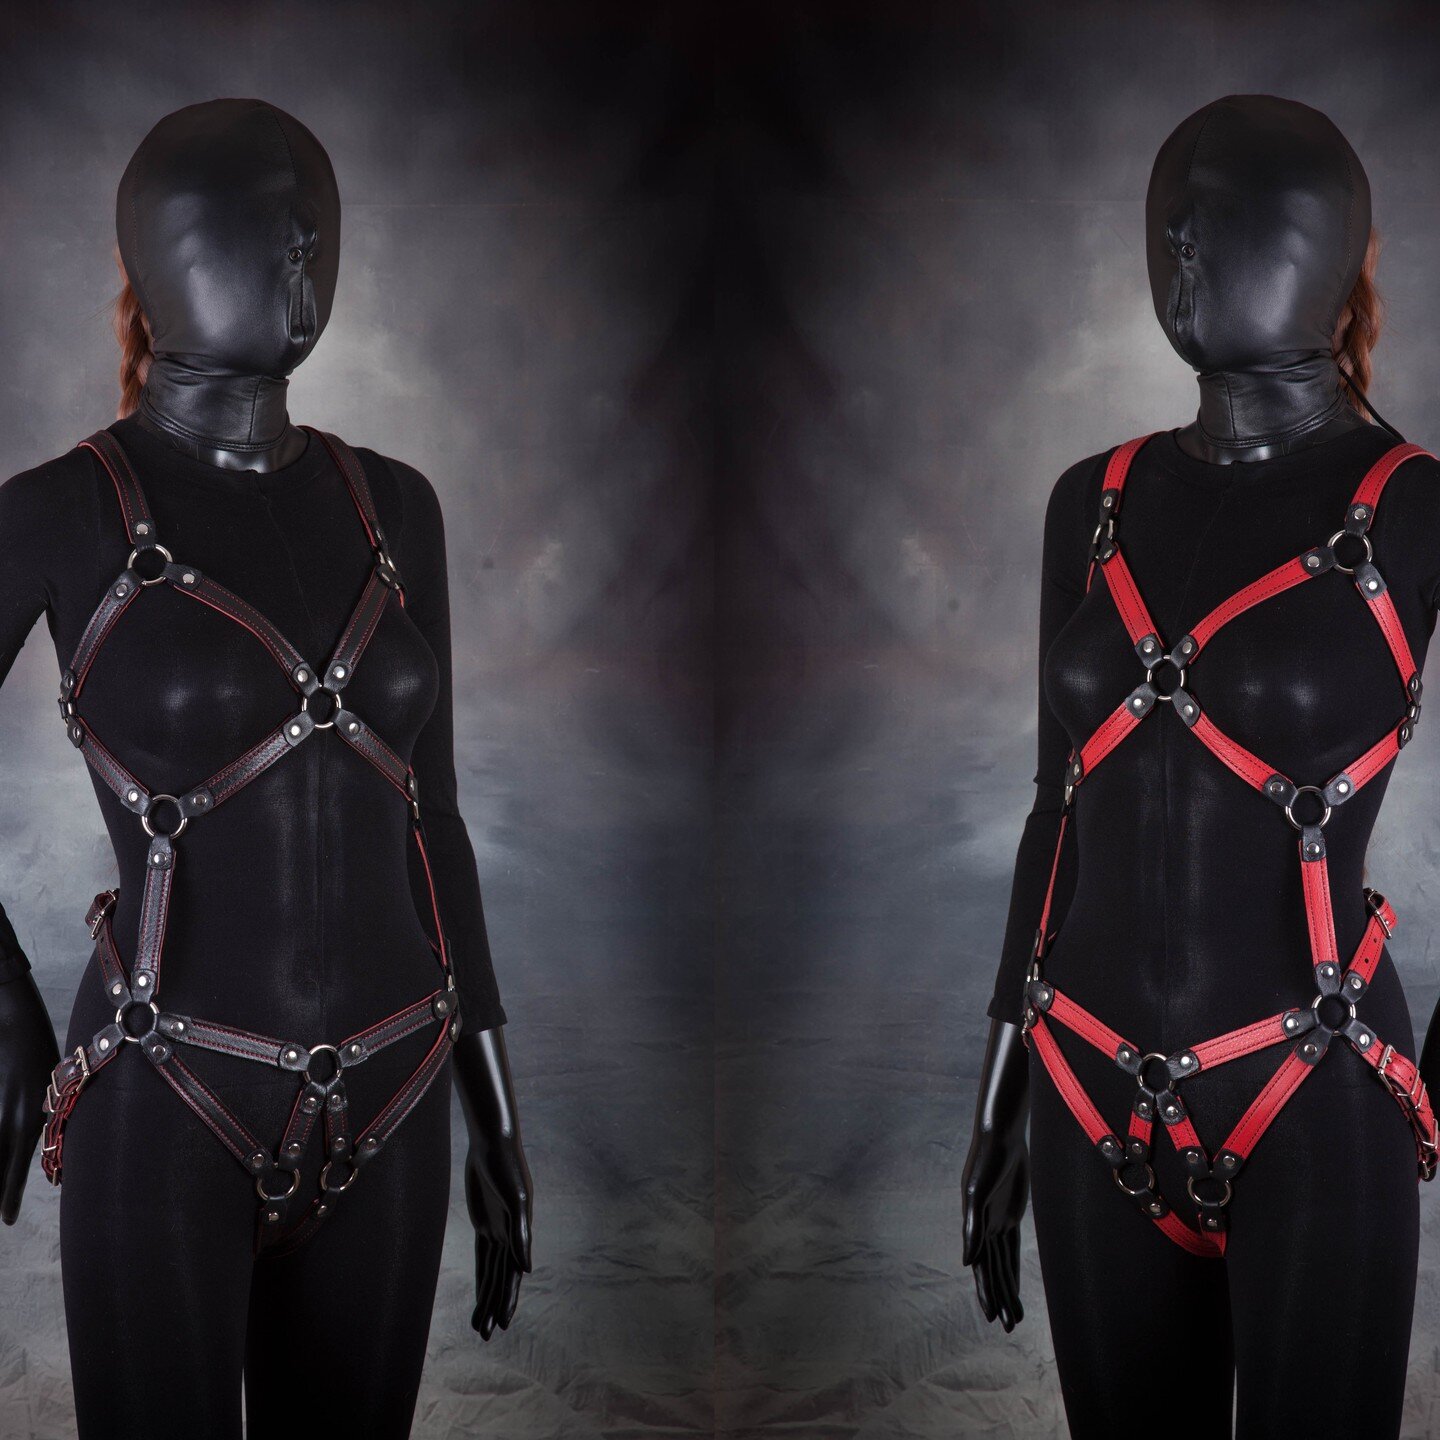 Don't be afraid to explore your wild side with our Nyx harness. The quality craftsmanship and attention to detail make it a must-have addition to any collection. #leatherlover #wildside #qualitycraftsmanship